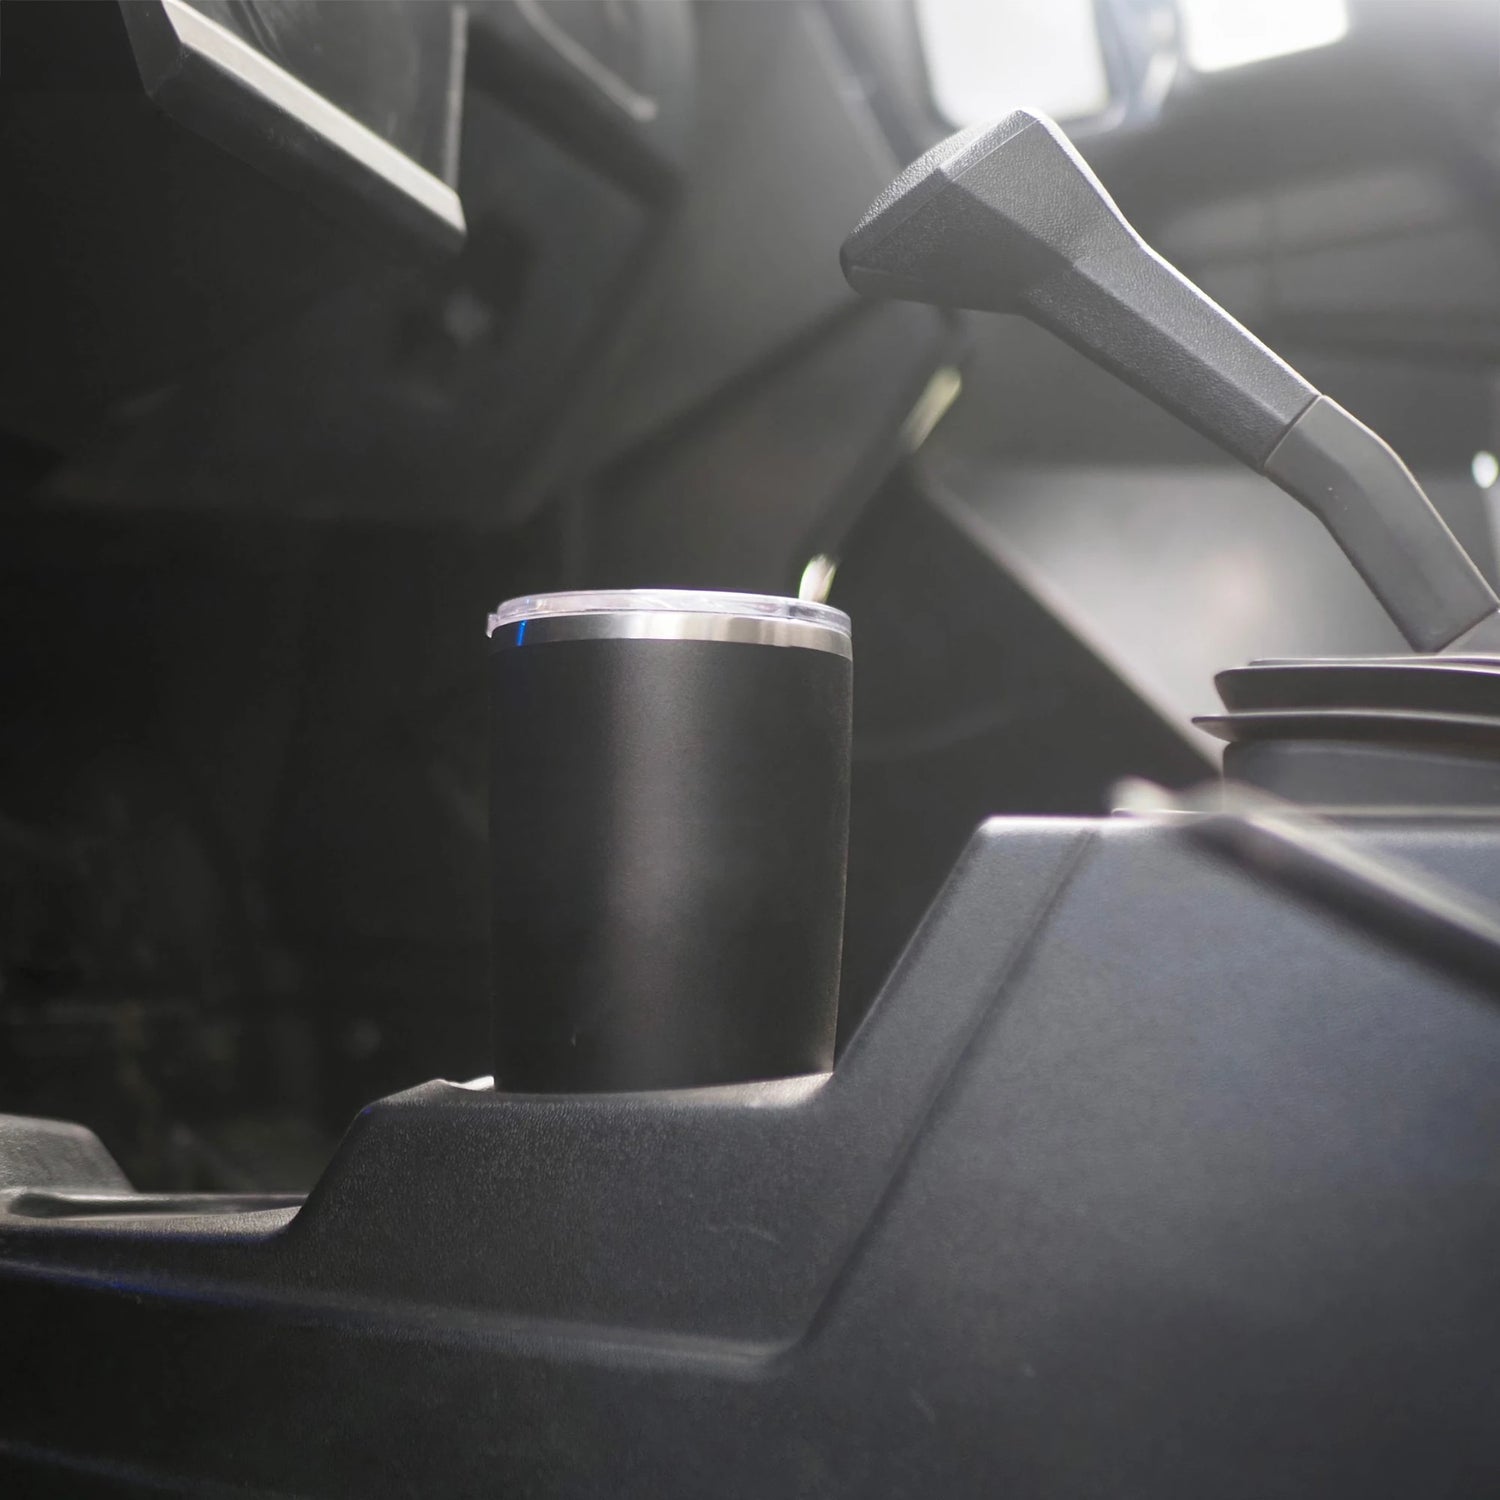 Secure your drink into any cup holder with the mini disc locking base and TwistLock Tumbler.